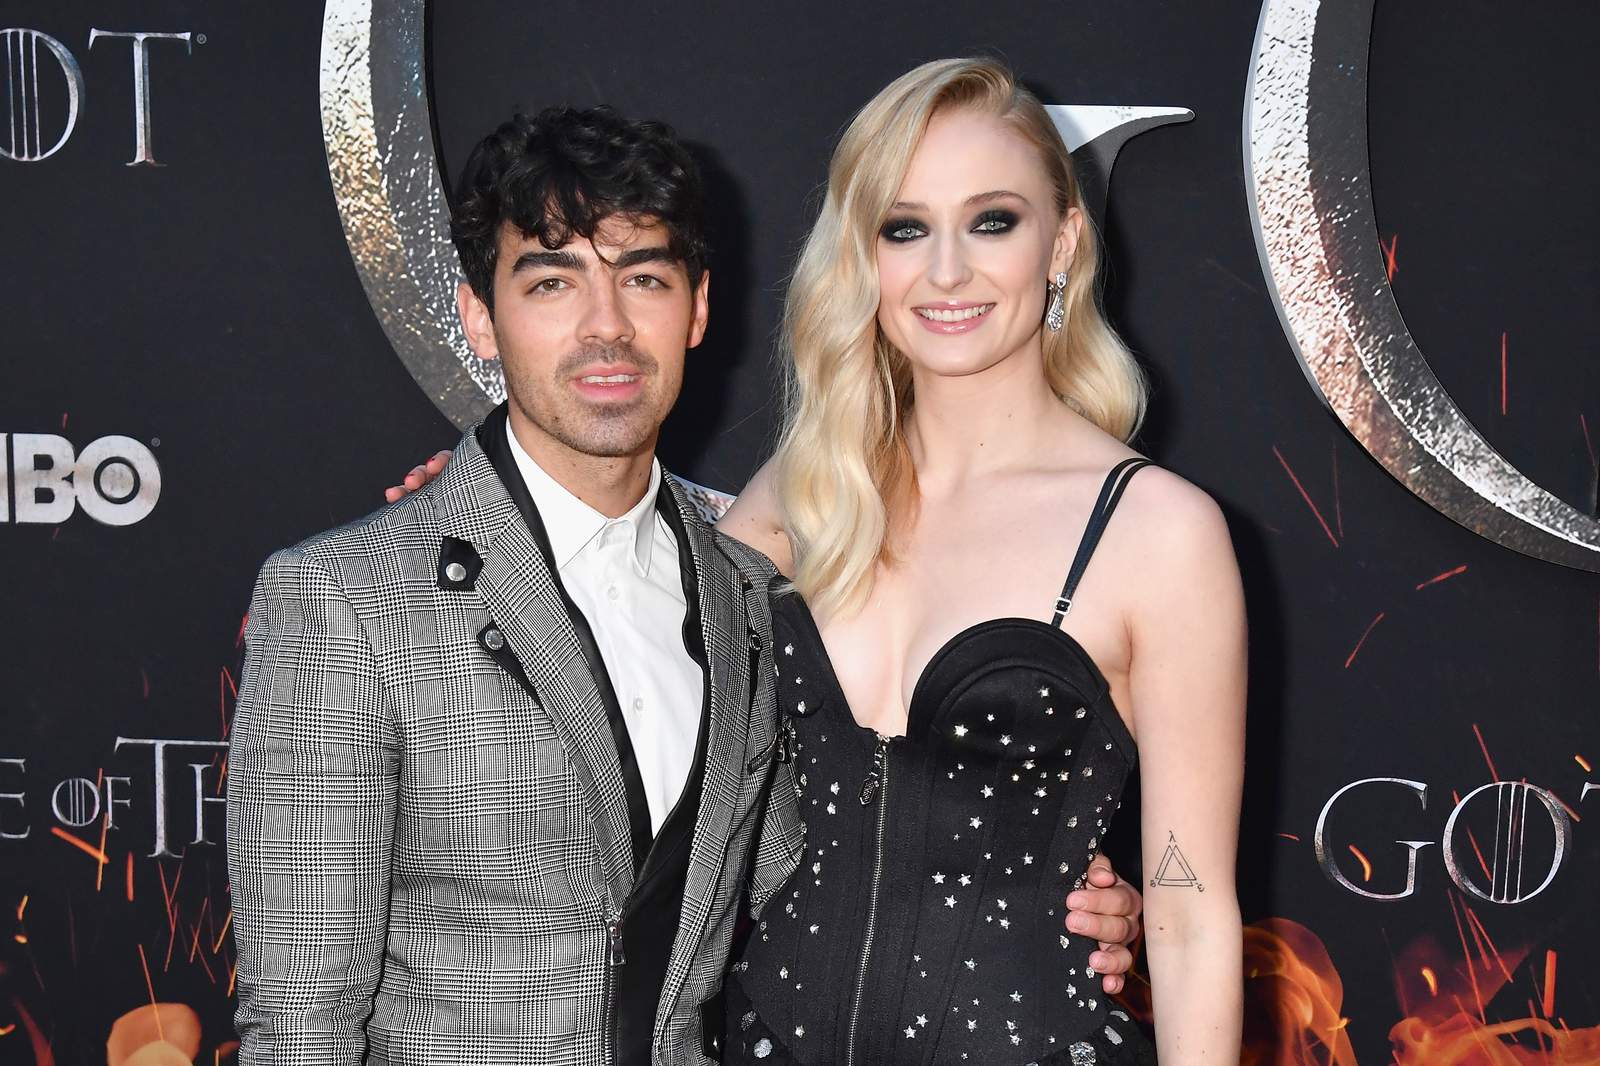 Sophie Turner and Joe Jonas reportedly named their baby Willa, and fans say it might have Game of Thrones connection